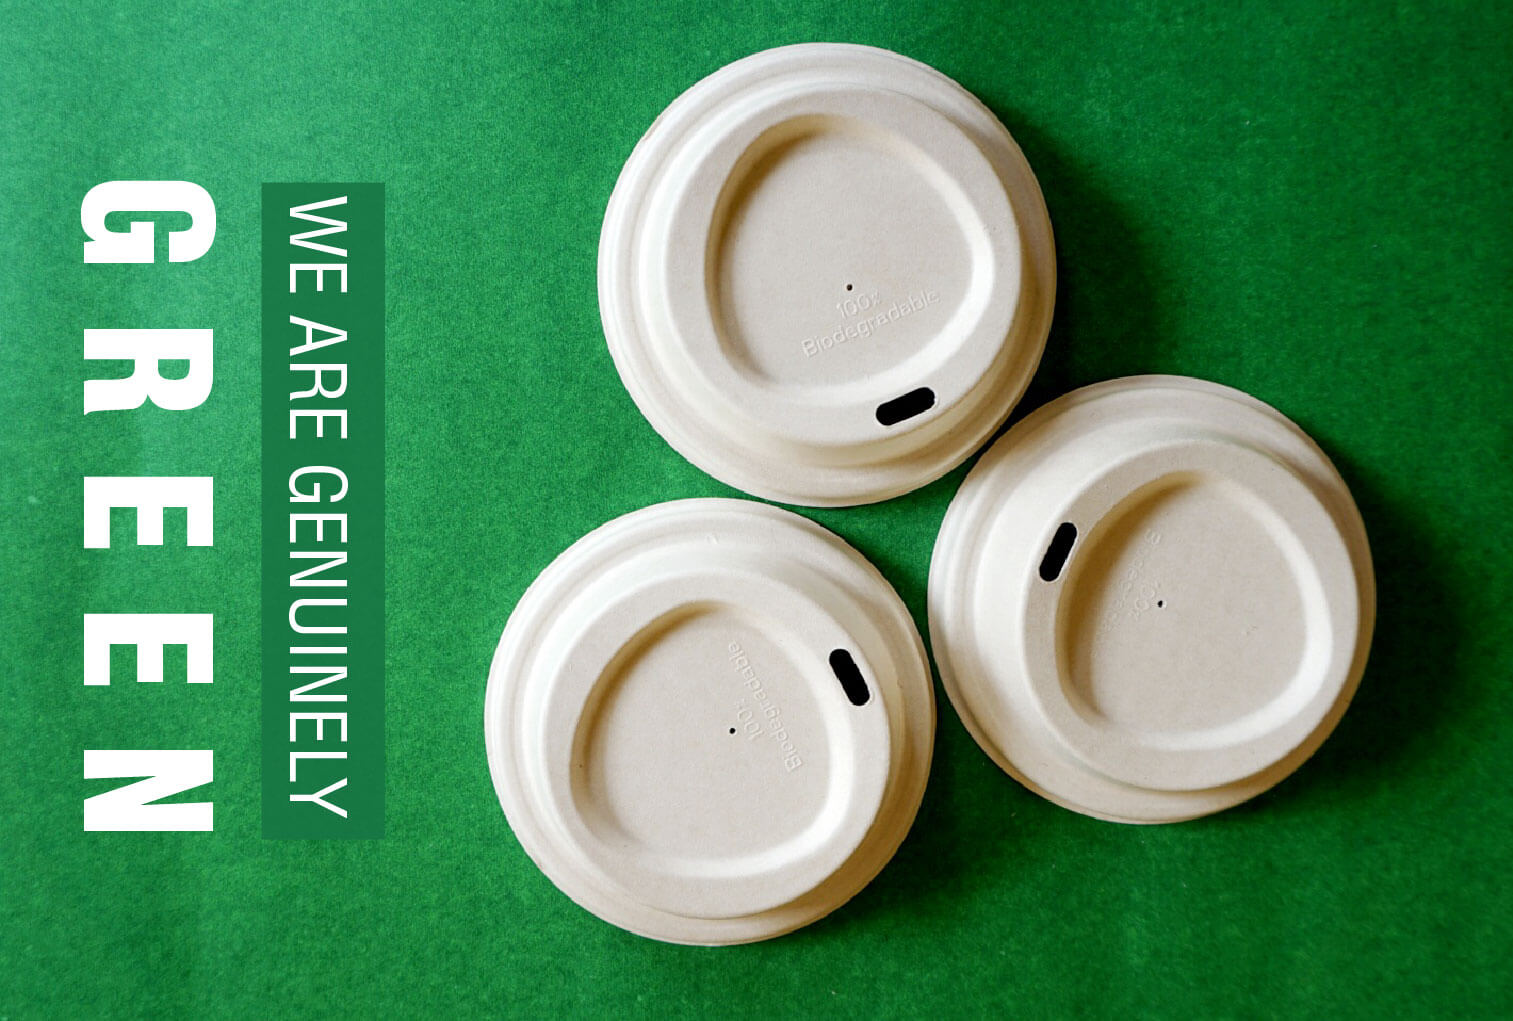 What is the difference between an ordinary cup lid and a biodegradable coffee lid